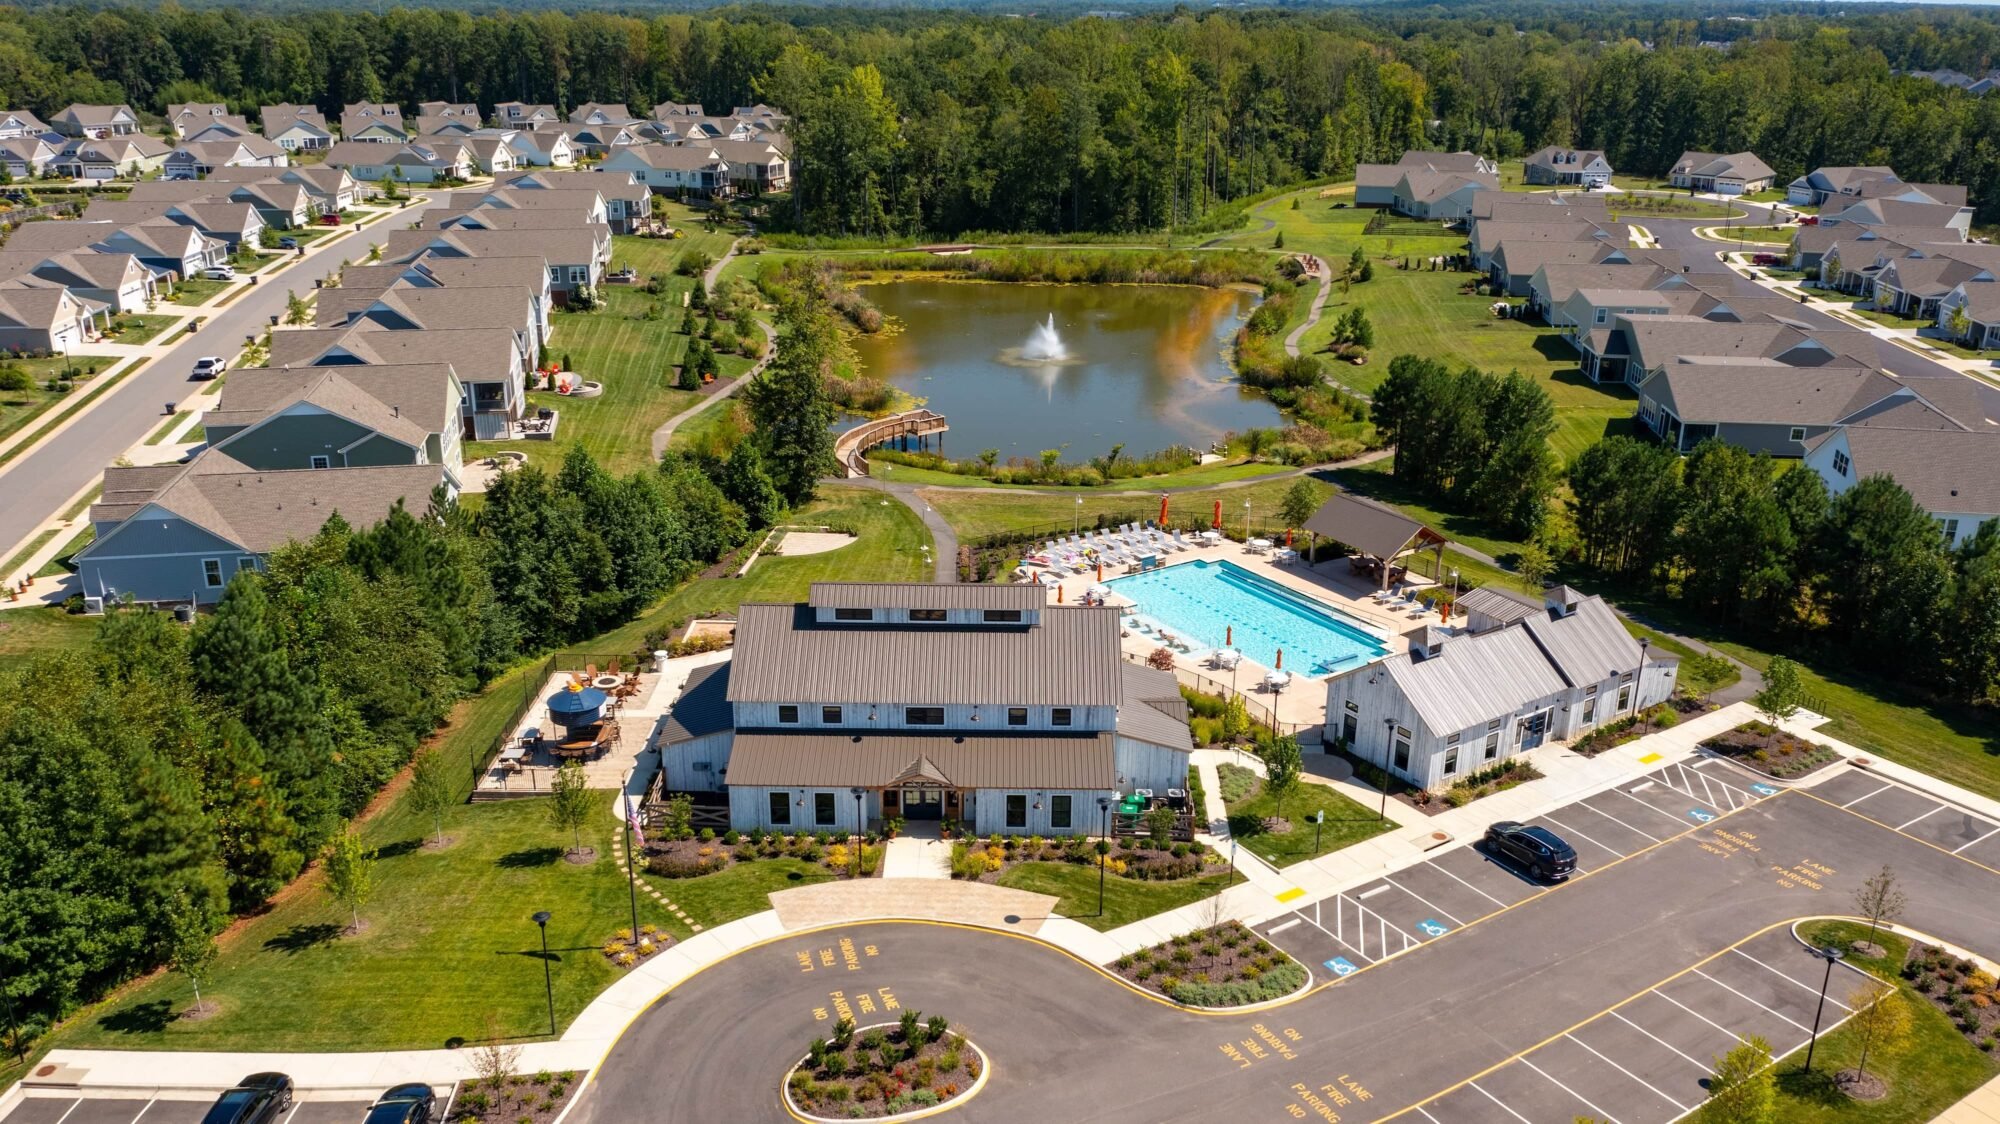 Congrats to @cornerstonehomes_va ' Chickahominy Falls community on being awarded by The National Association of Home Builders' (NAHB) for 'Best in American Living Platinum Award for Single-Family Community, 100 units and over'.

&quot;This unique 55+